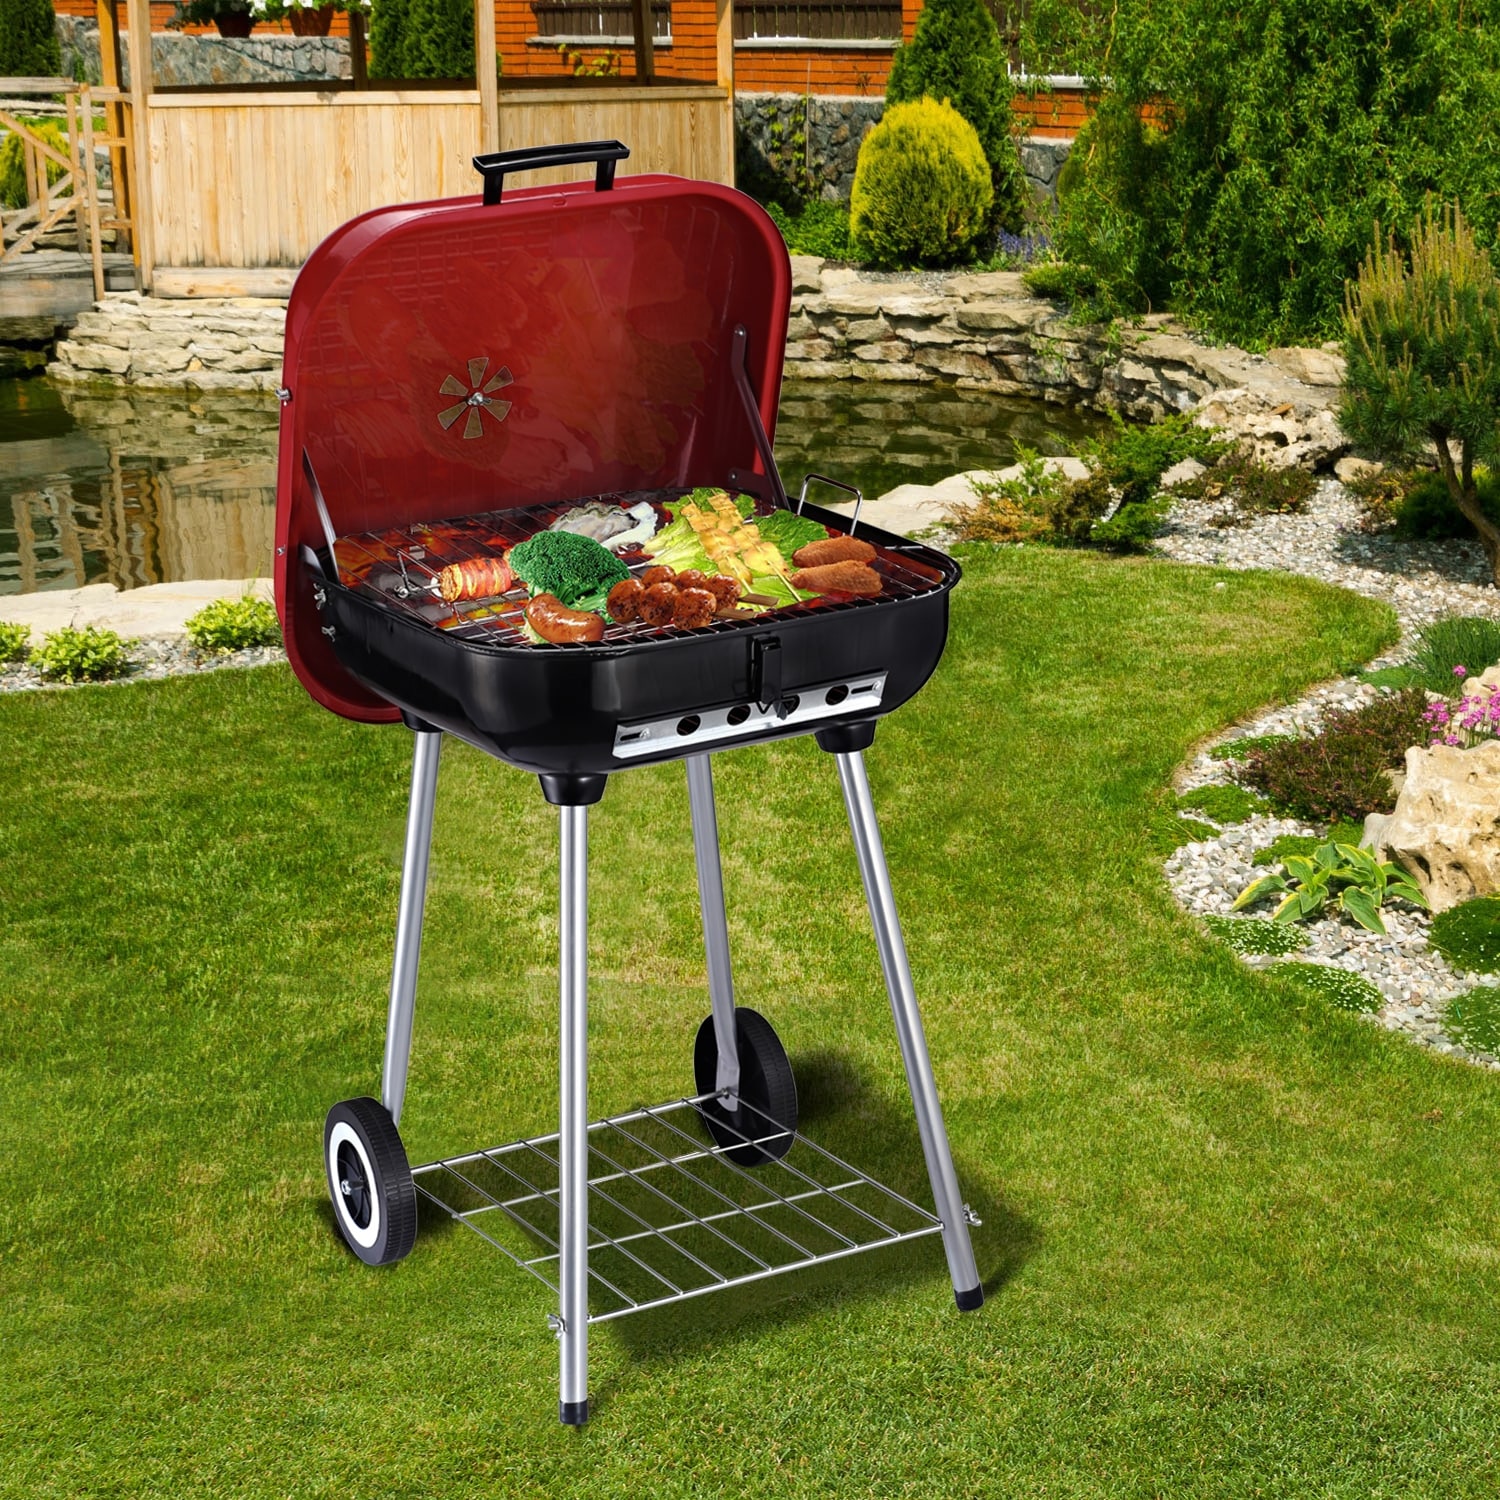 https://ak1.ostkcdn.com/images/products/is/images/direct/52d38dce6917ad1006866dec550186dea78f942a/Outsunny-Steel-Portable-Charcoal-Barbecue-Grill.jpg